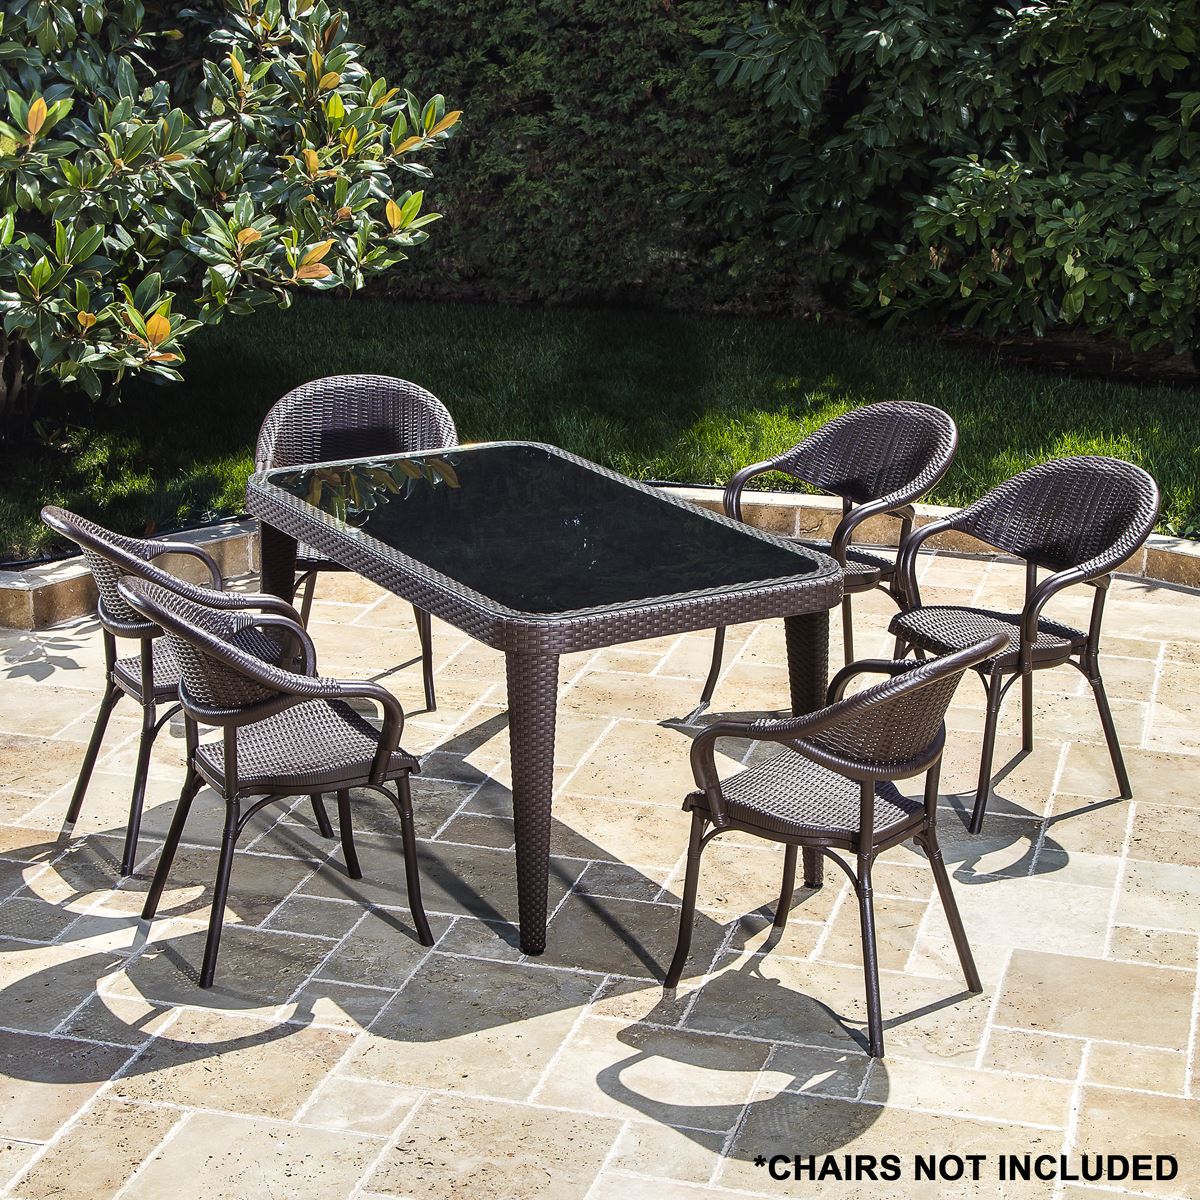 Dellonda Outdoor Dining Table Weather Resistant Glass Table 90x150cm